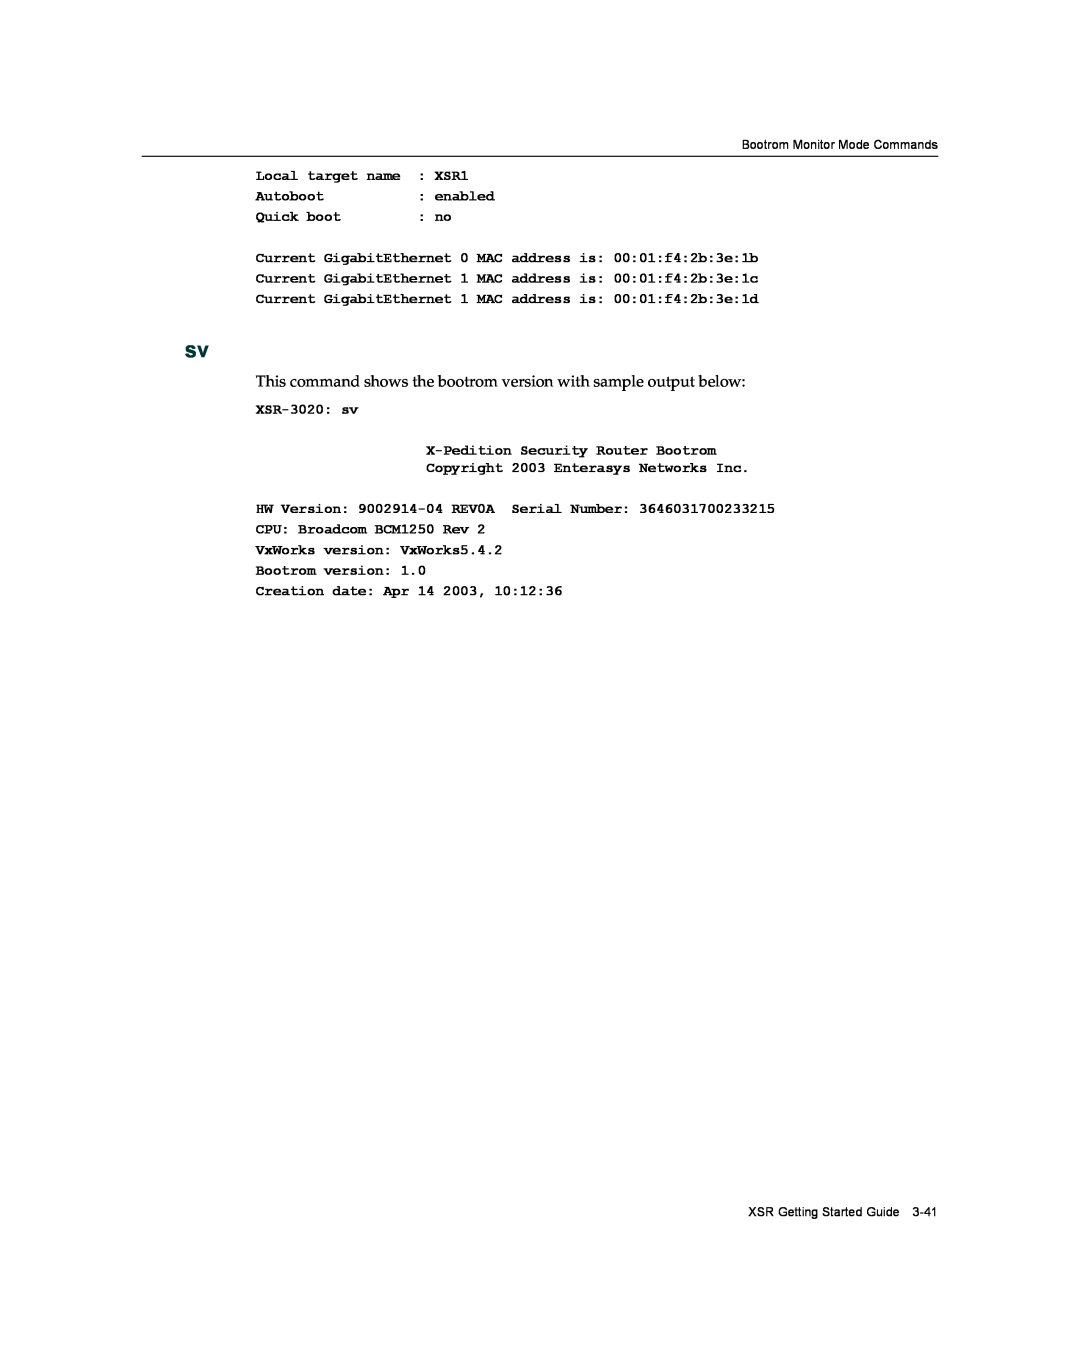 Enterasys Networks XSR-3020 manual This command shows the bootrom version with sample output below 